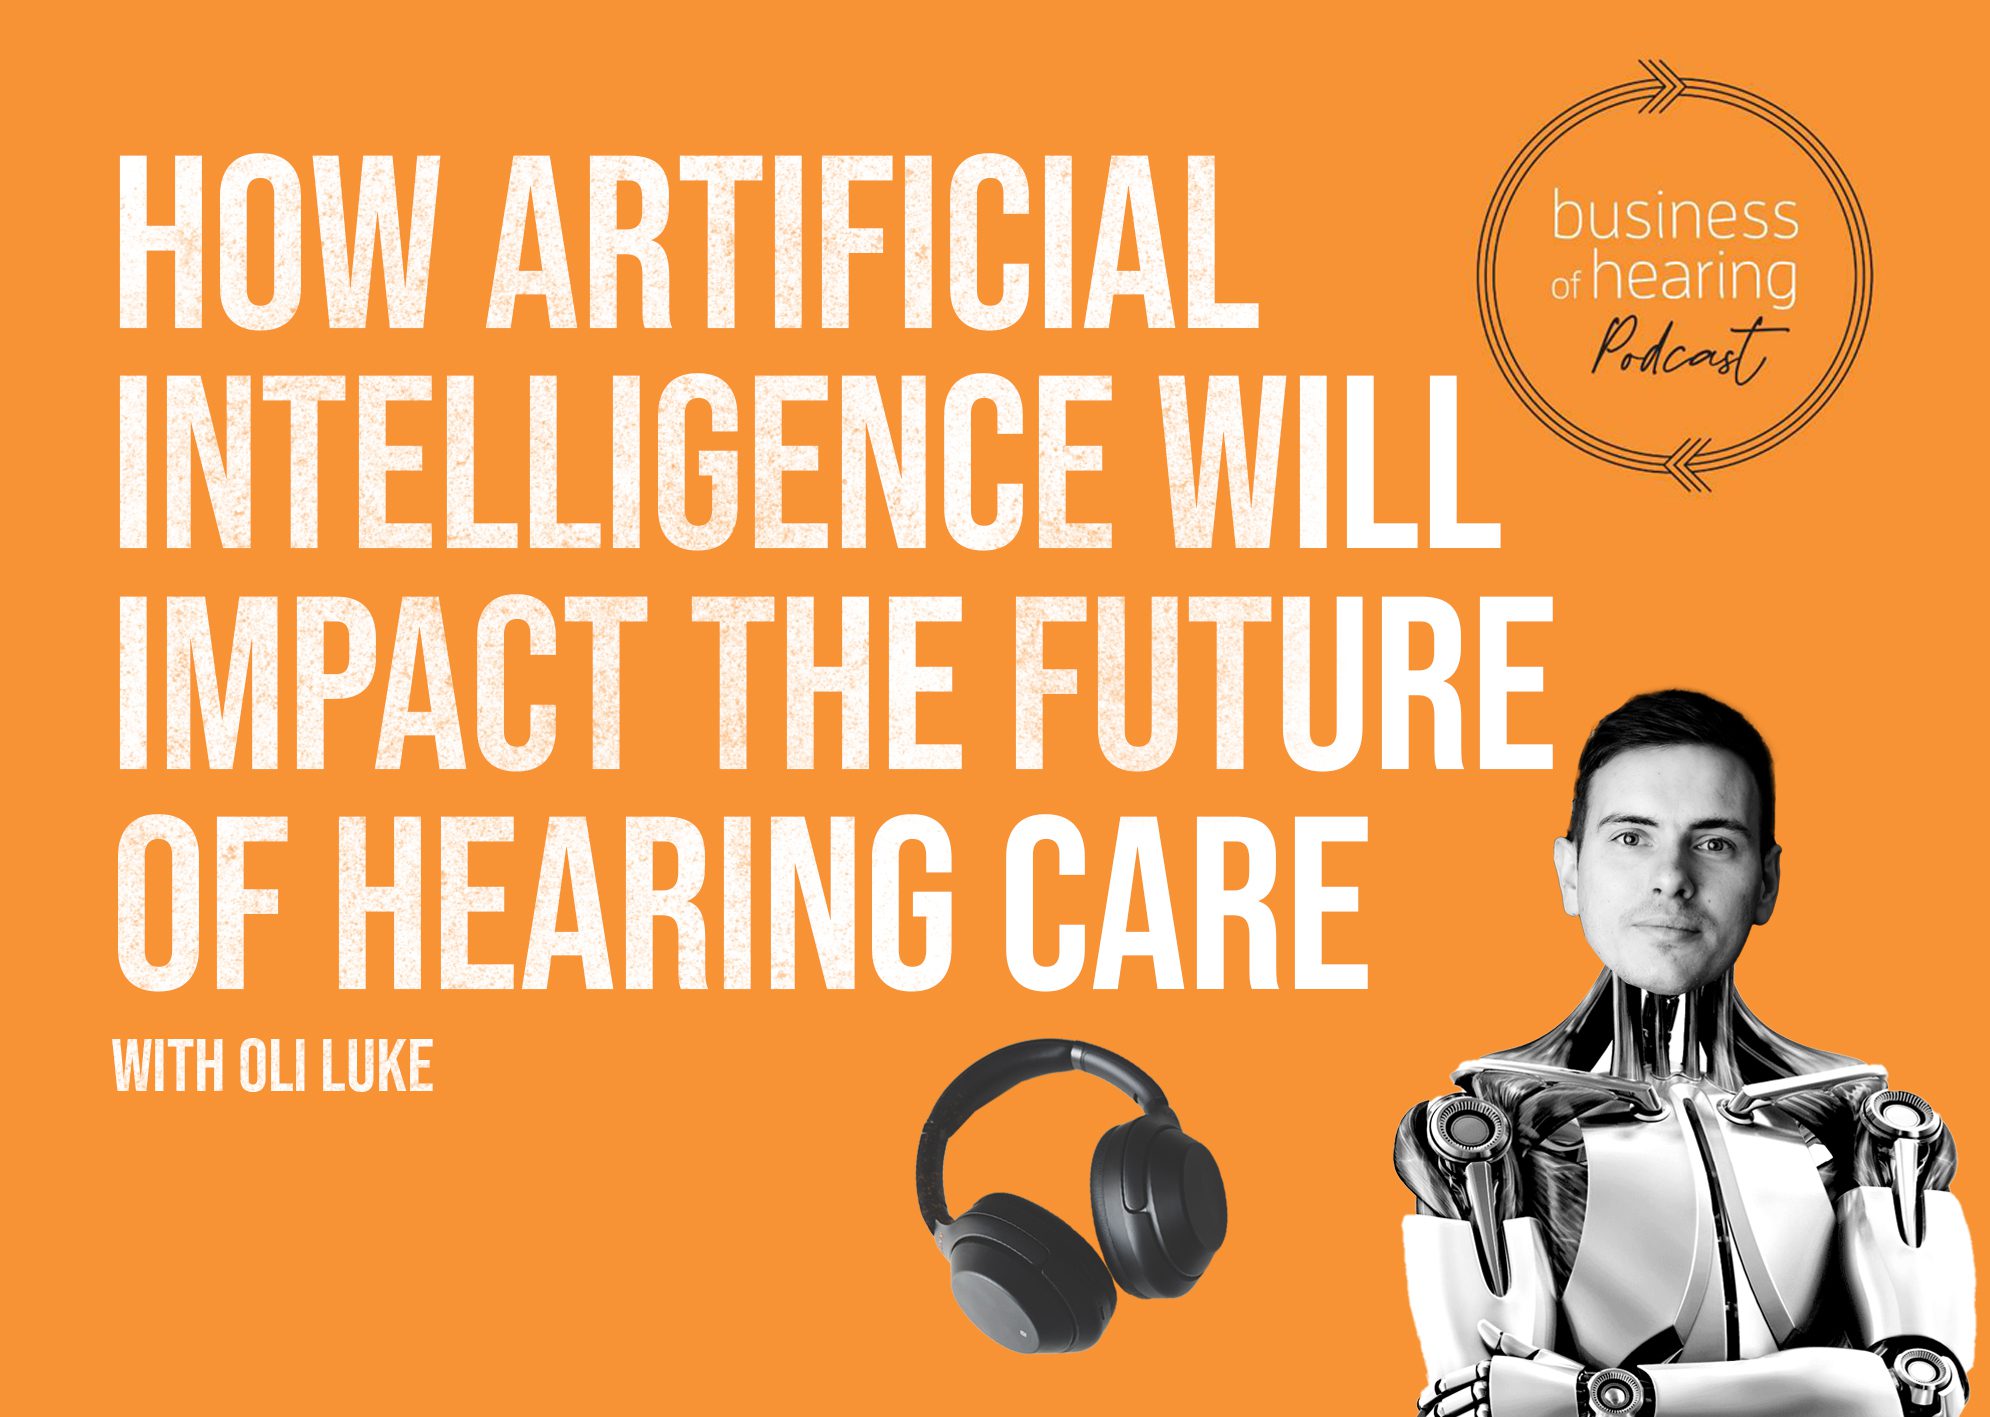 How artificial intelligence will impact the future of hearing care image